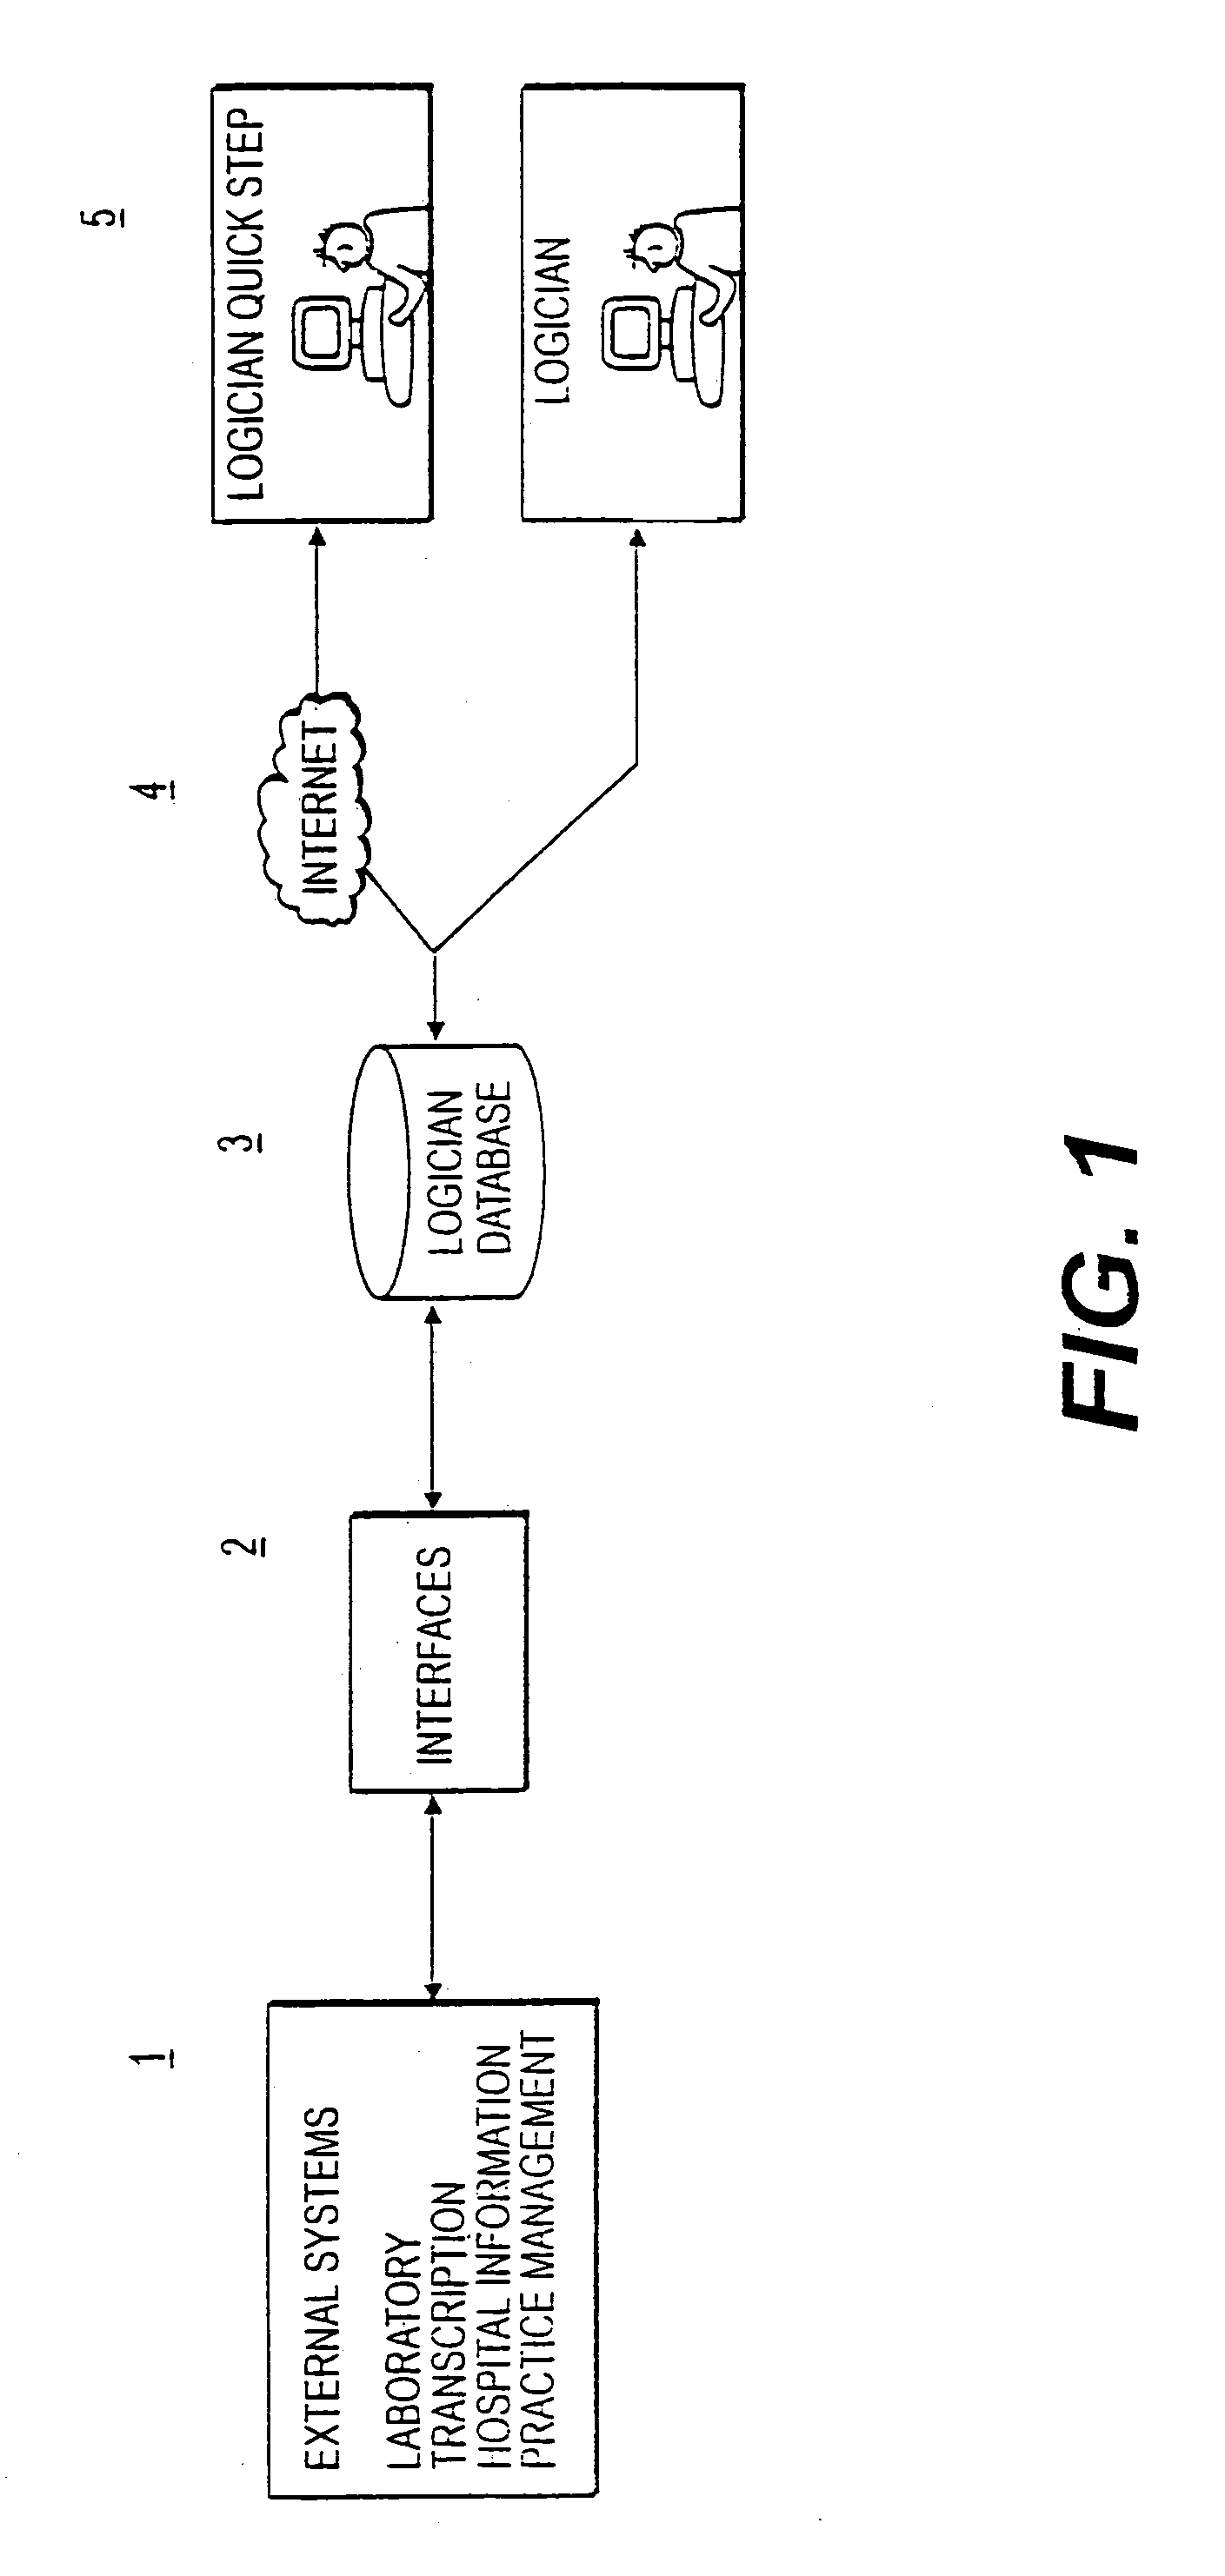 Input devices for entering data into an electronic medical record (EMR)